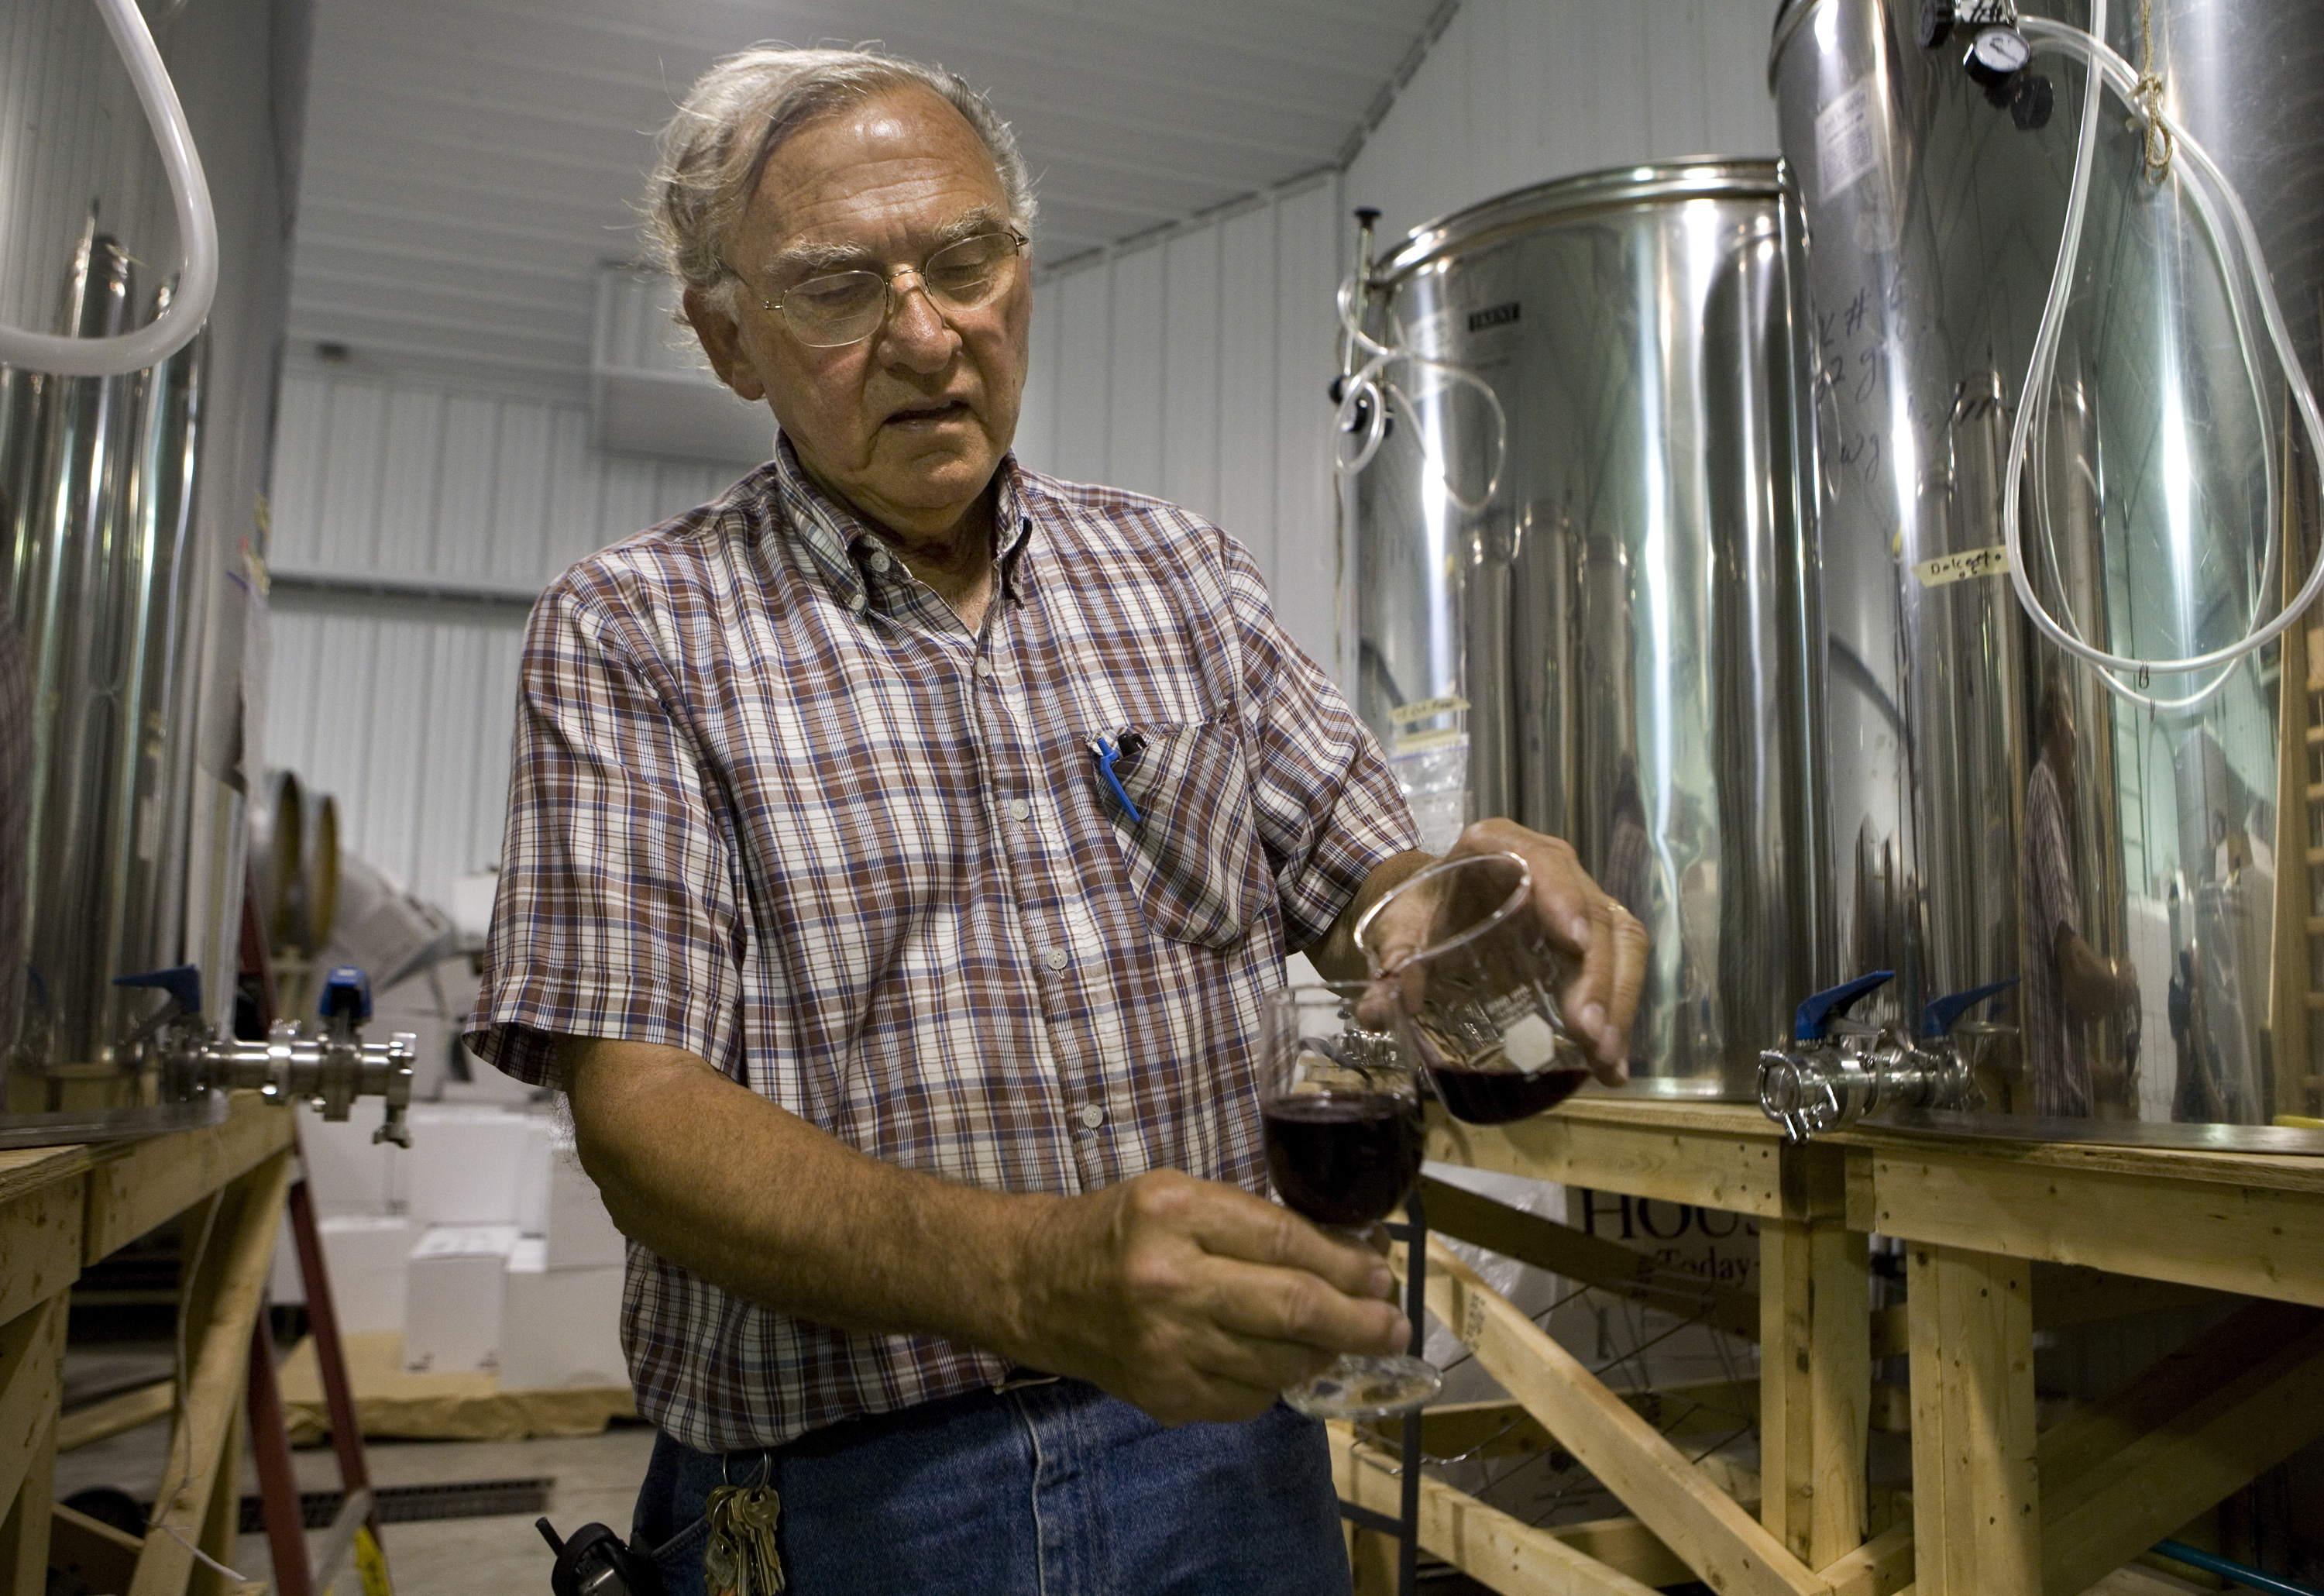 Silvio Ciccone sampling aging wine at Ciccone Vineyard and Winery in Michigan on July 18, 2006. | Source: Getty Images